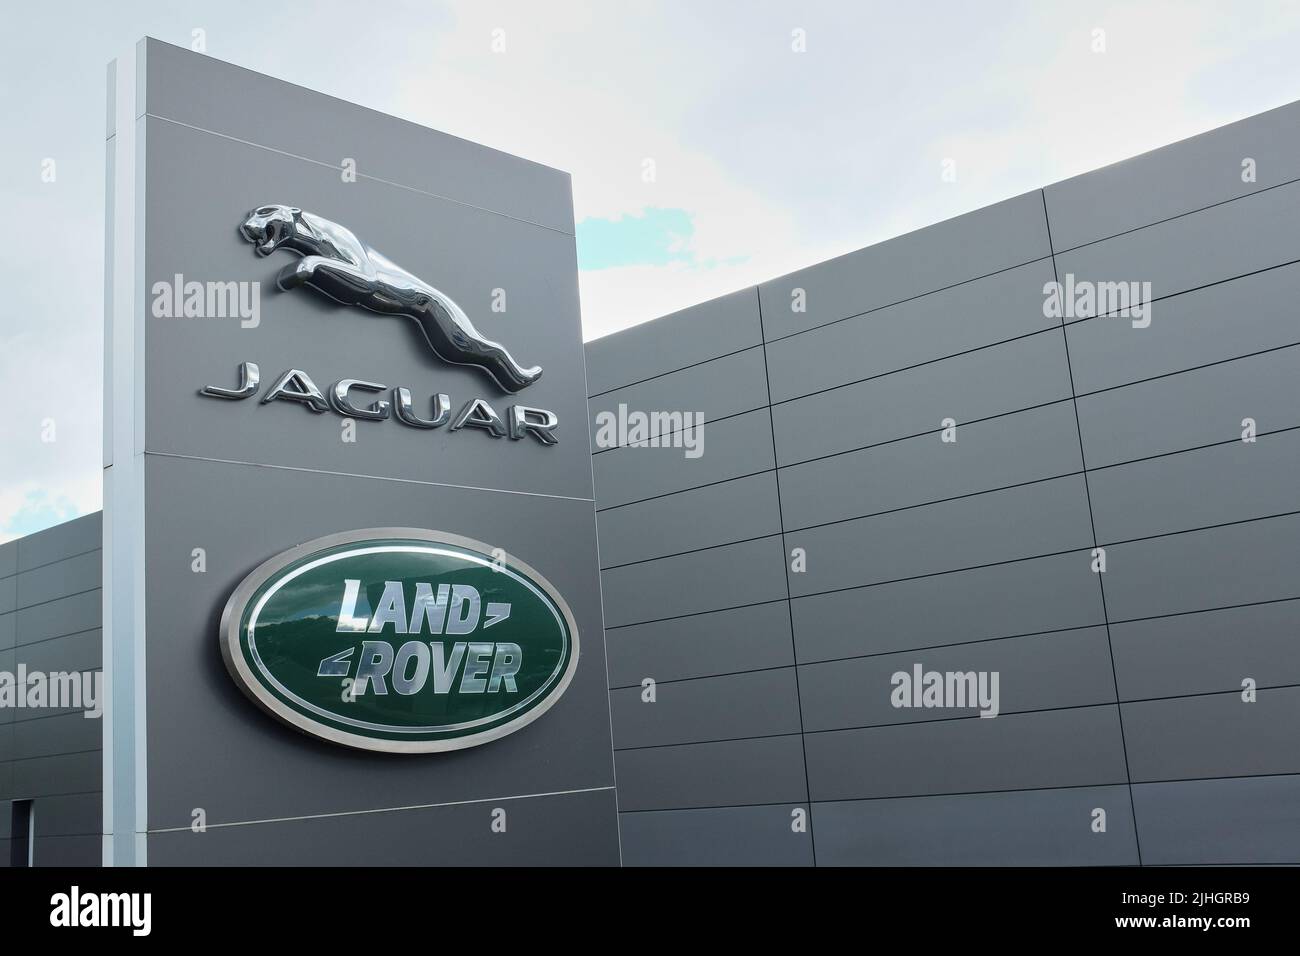 Kentdale Jaguar Land Rover garage with the Jaguar and Land Rover brand names and logos prominently displayed Stock Photo